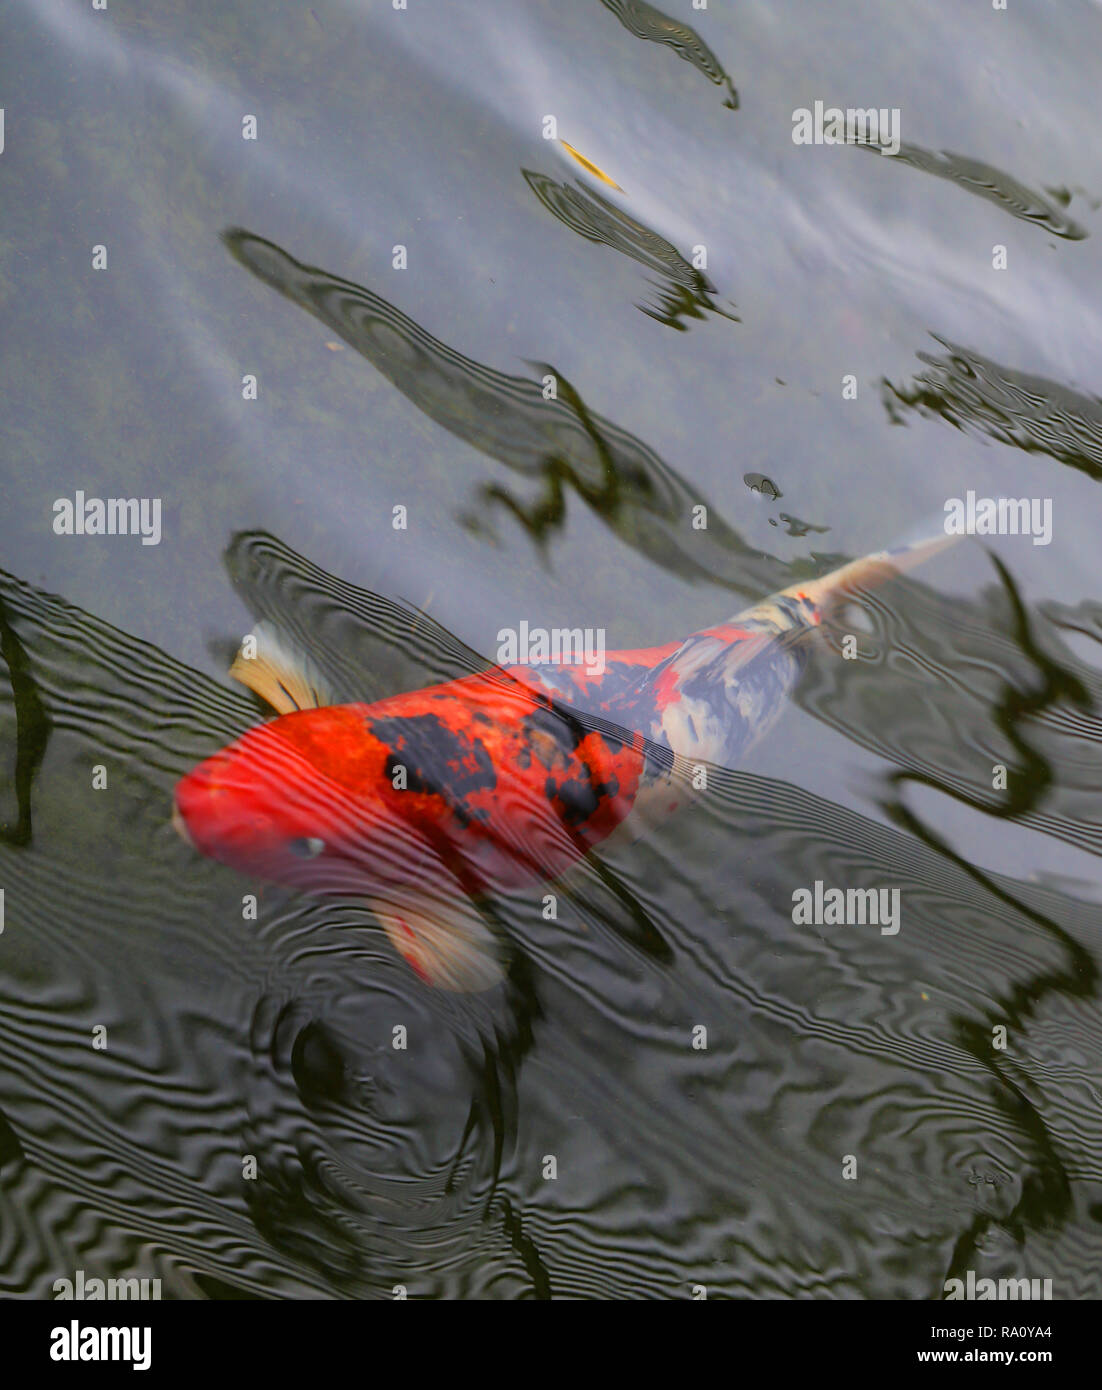 Bright macro photo of red carp fish in clear water of a reservoir Stock Photo